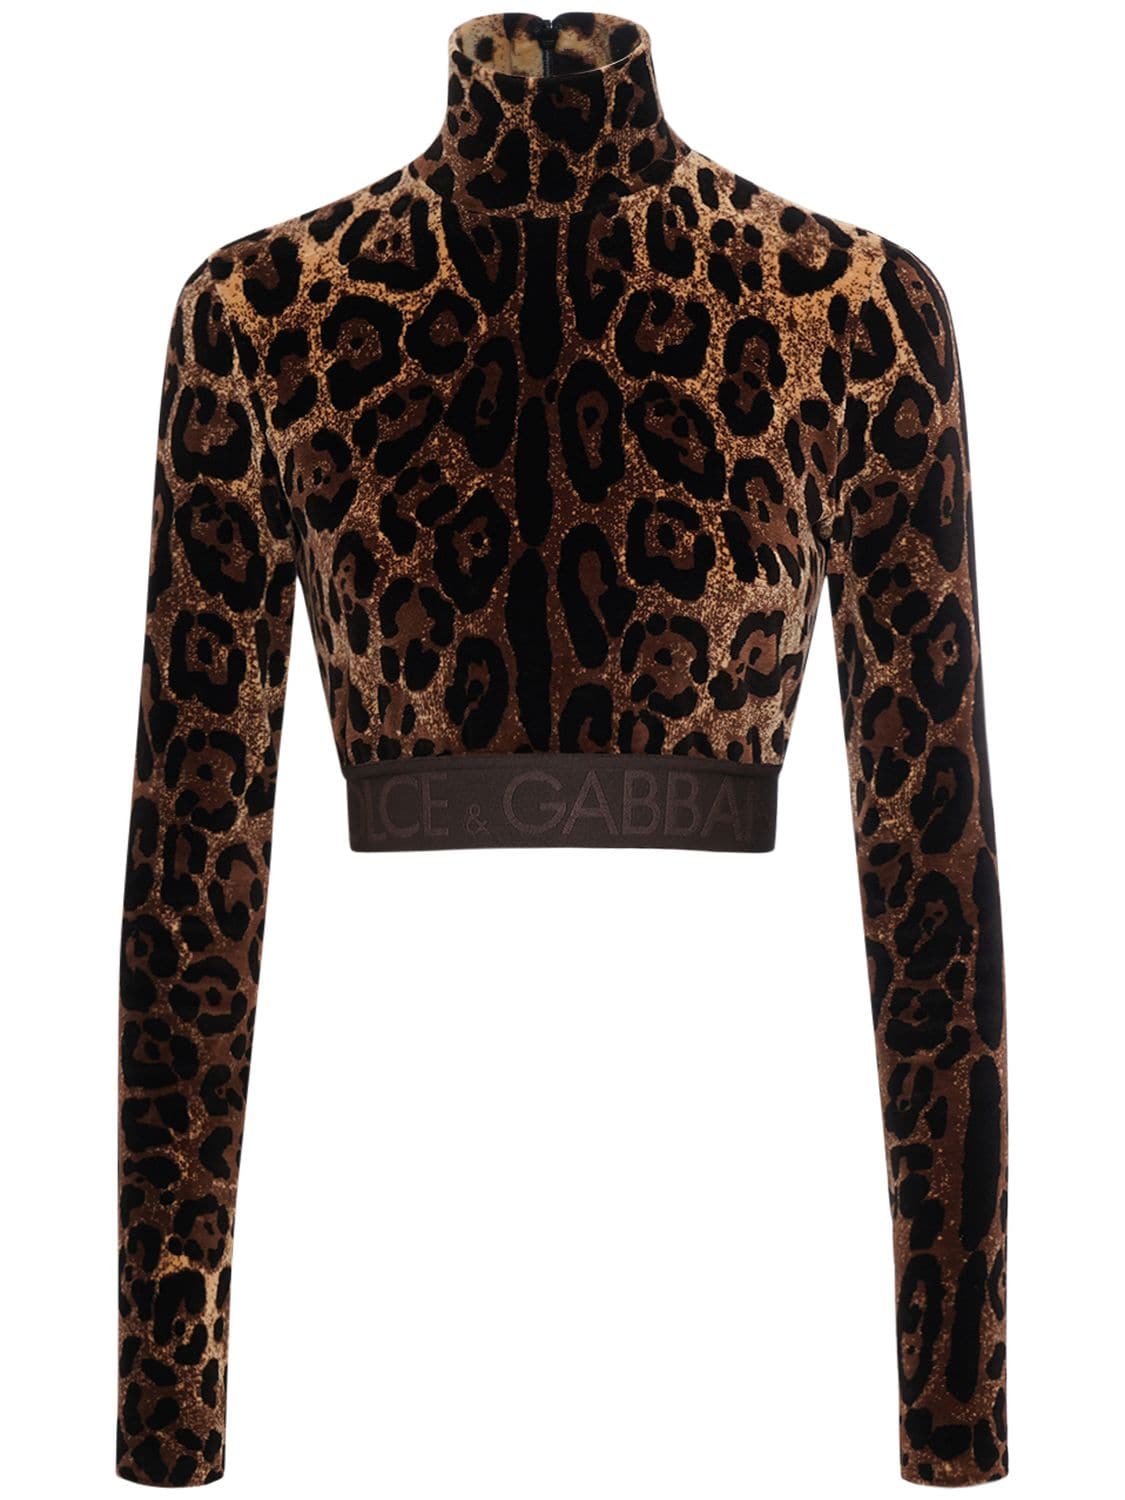 Image of Leopard Print Chenille Crop Top